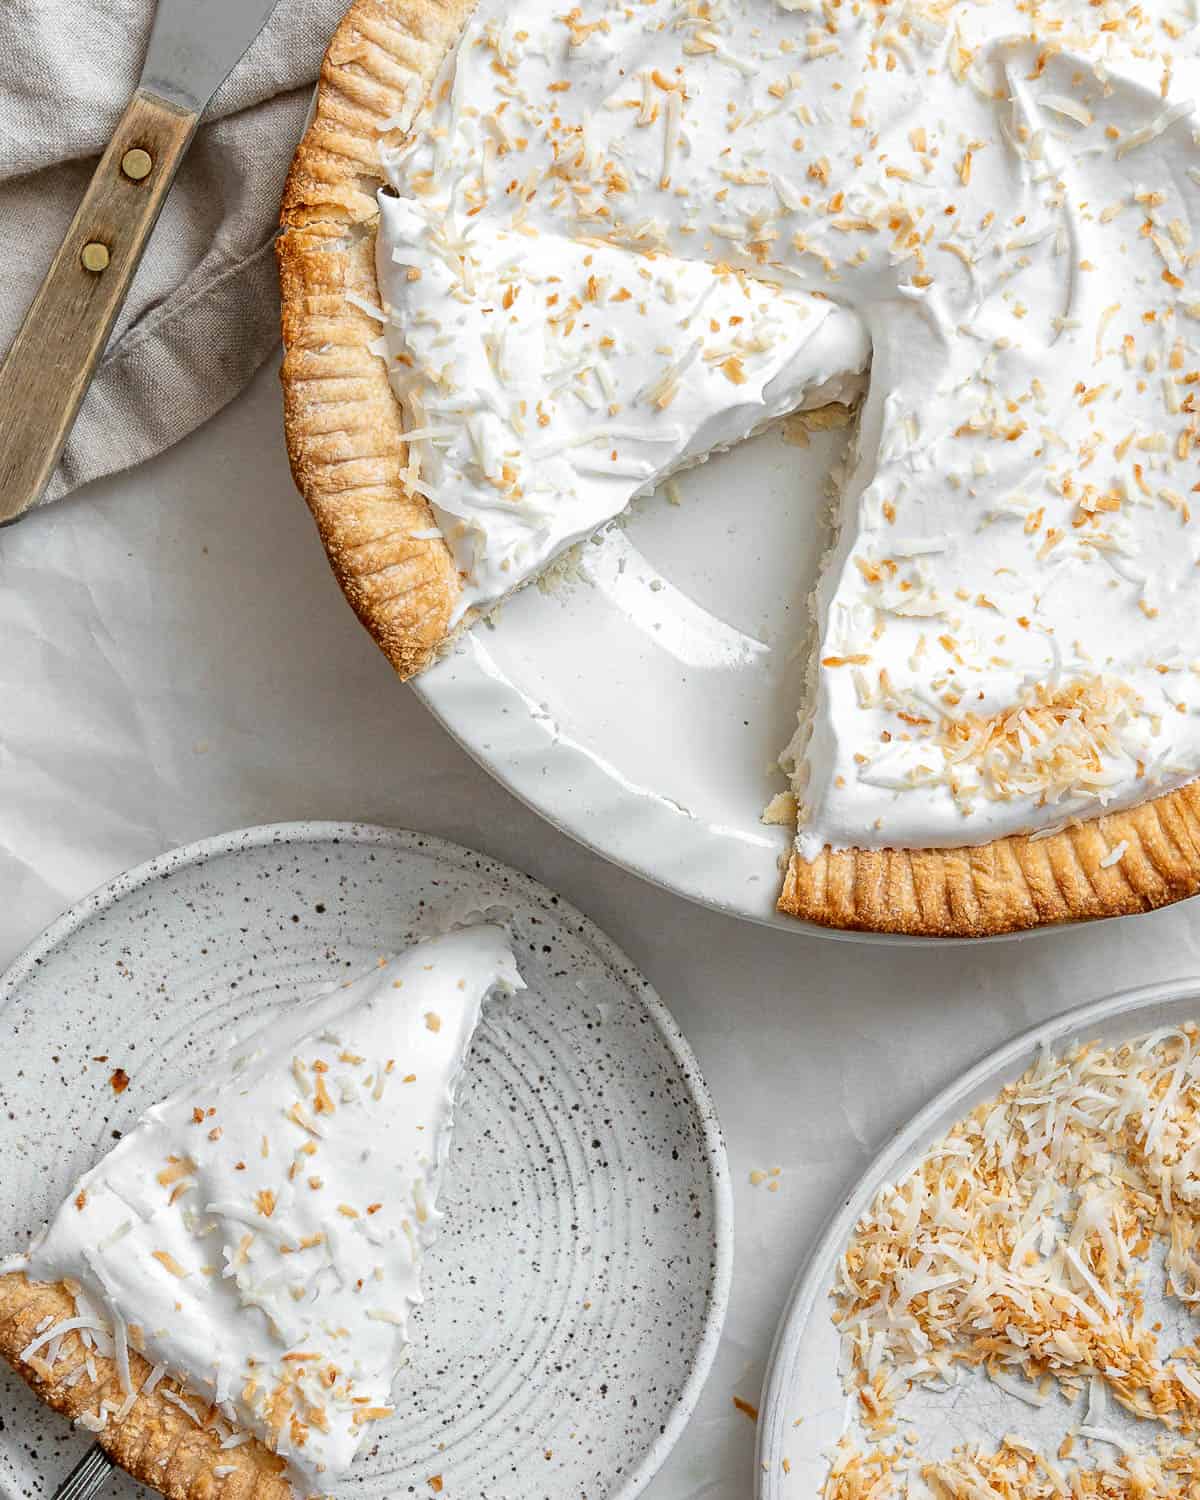 completed Vegan Coconut Cream Pie against a white background